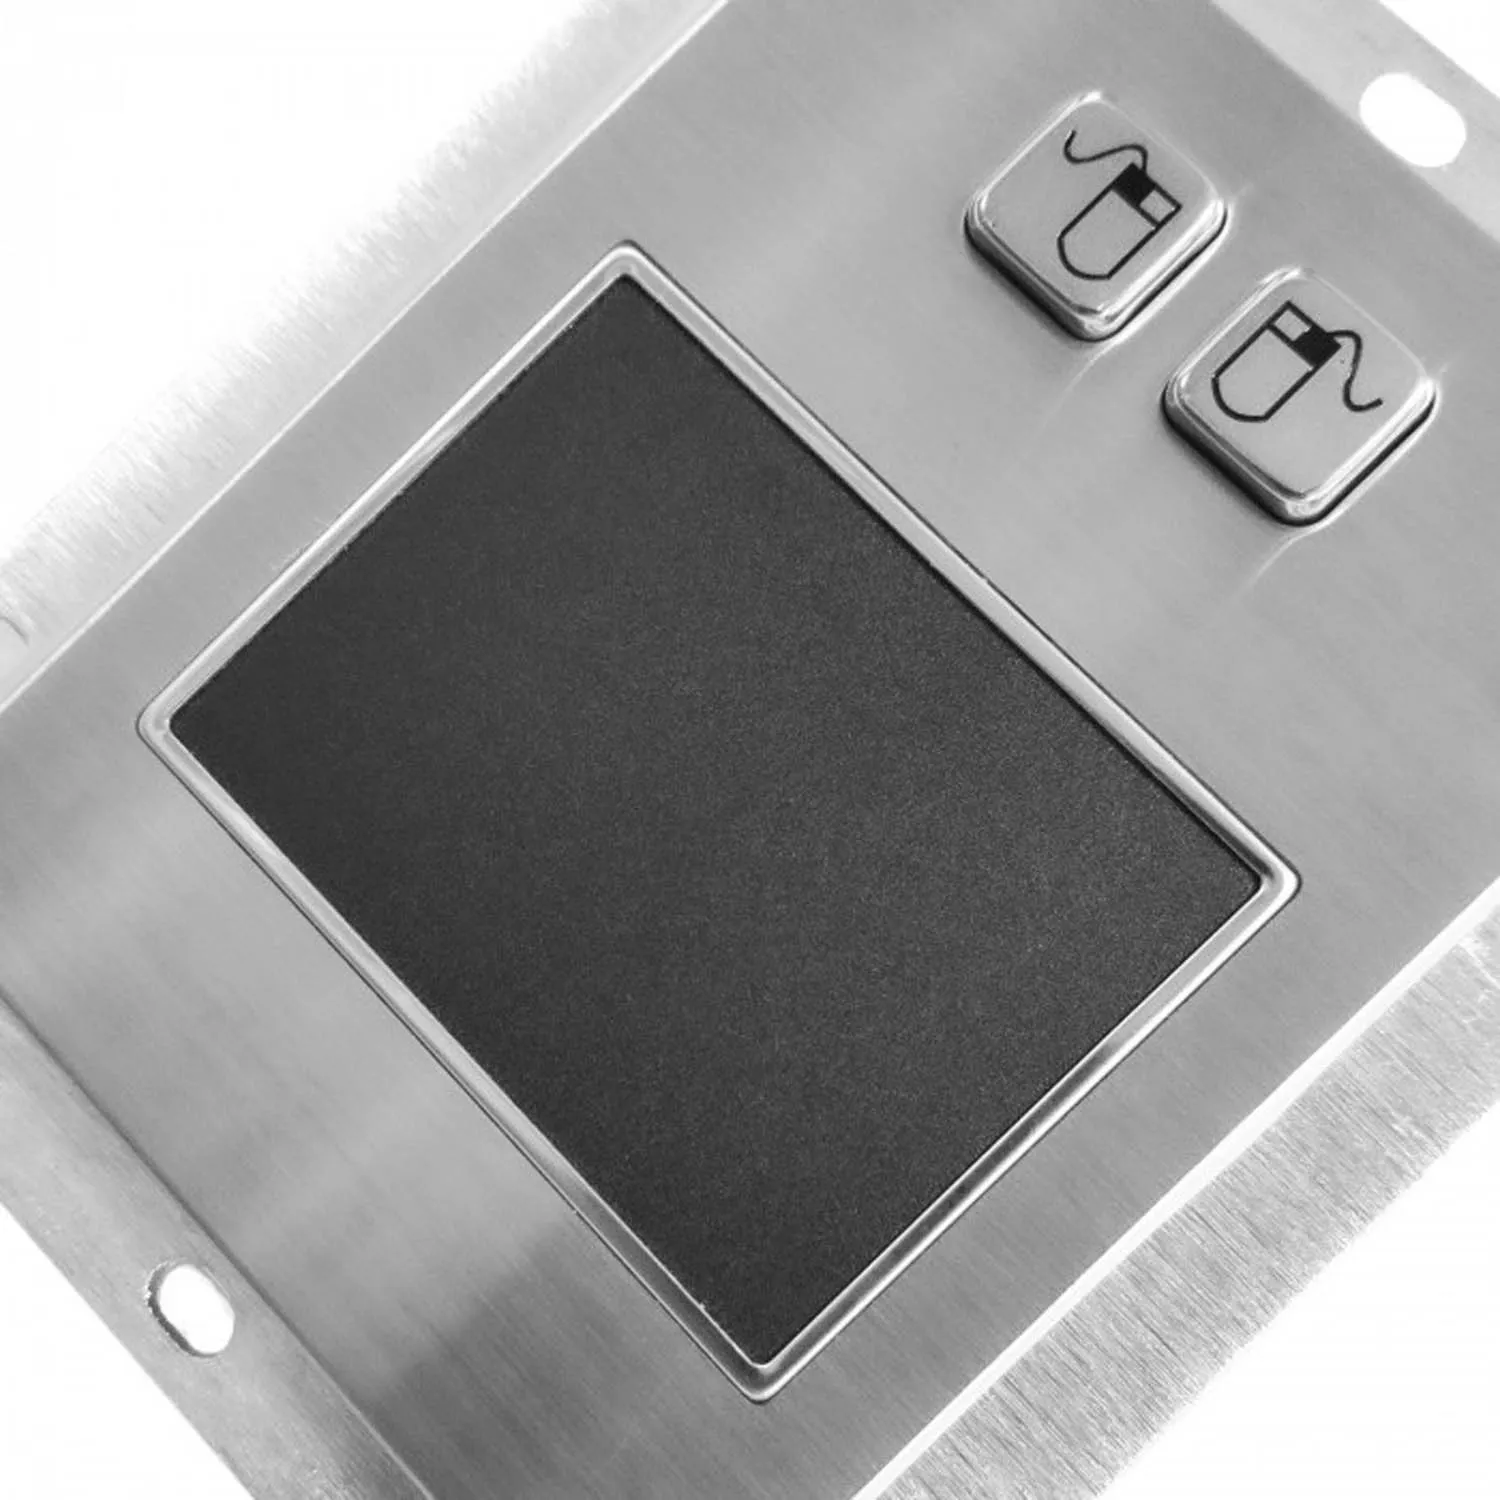 KL-000-NW0S003 touchpad